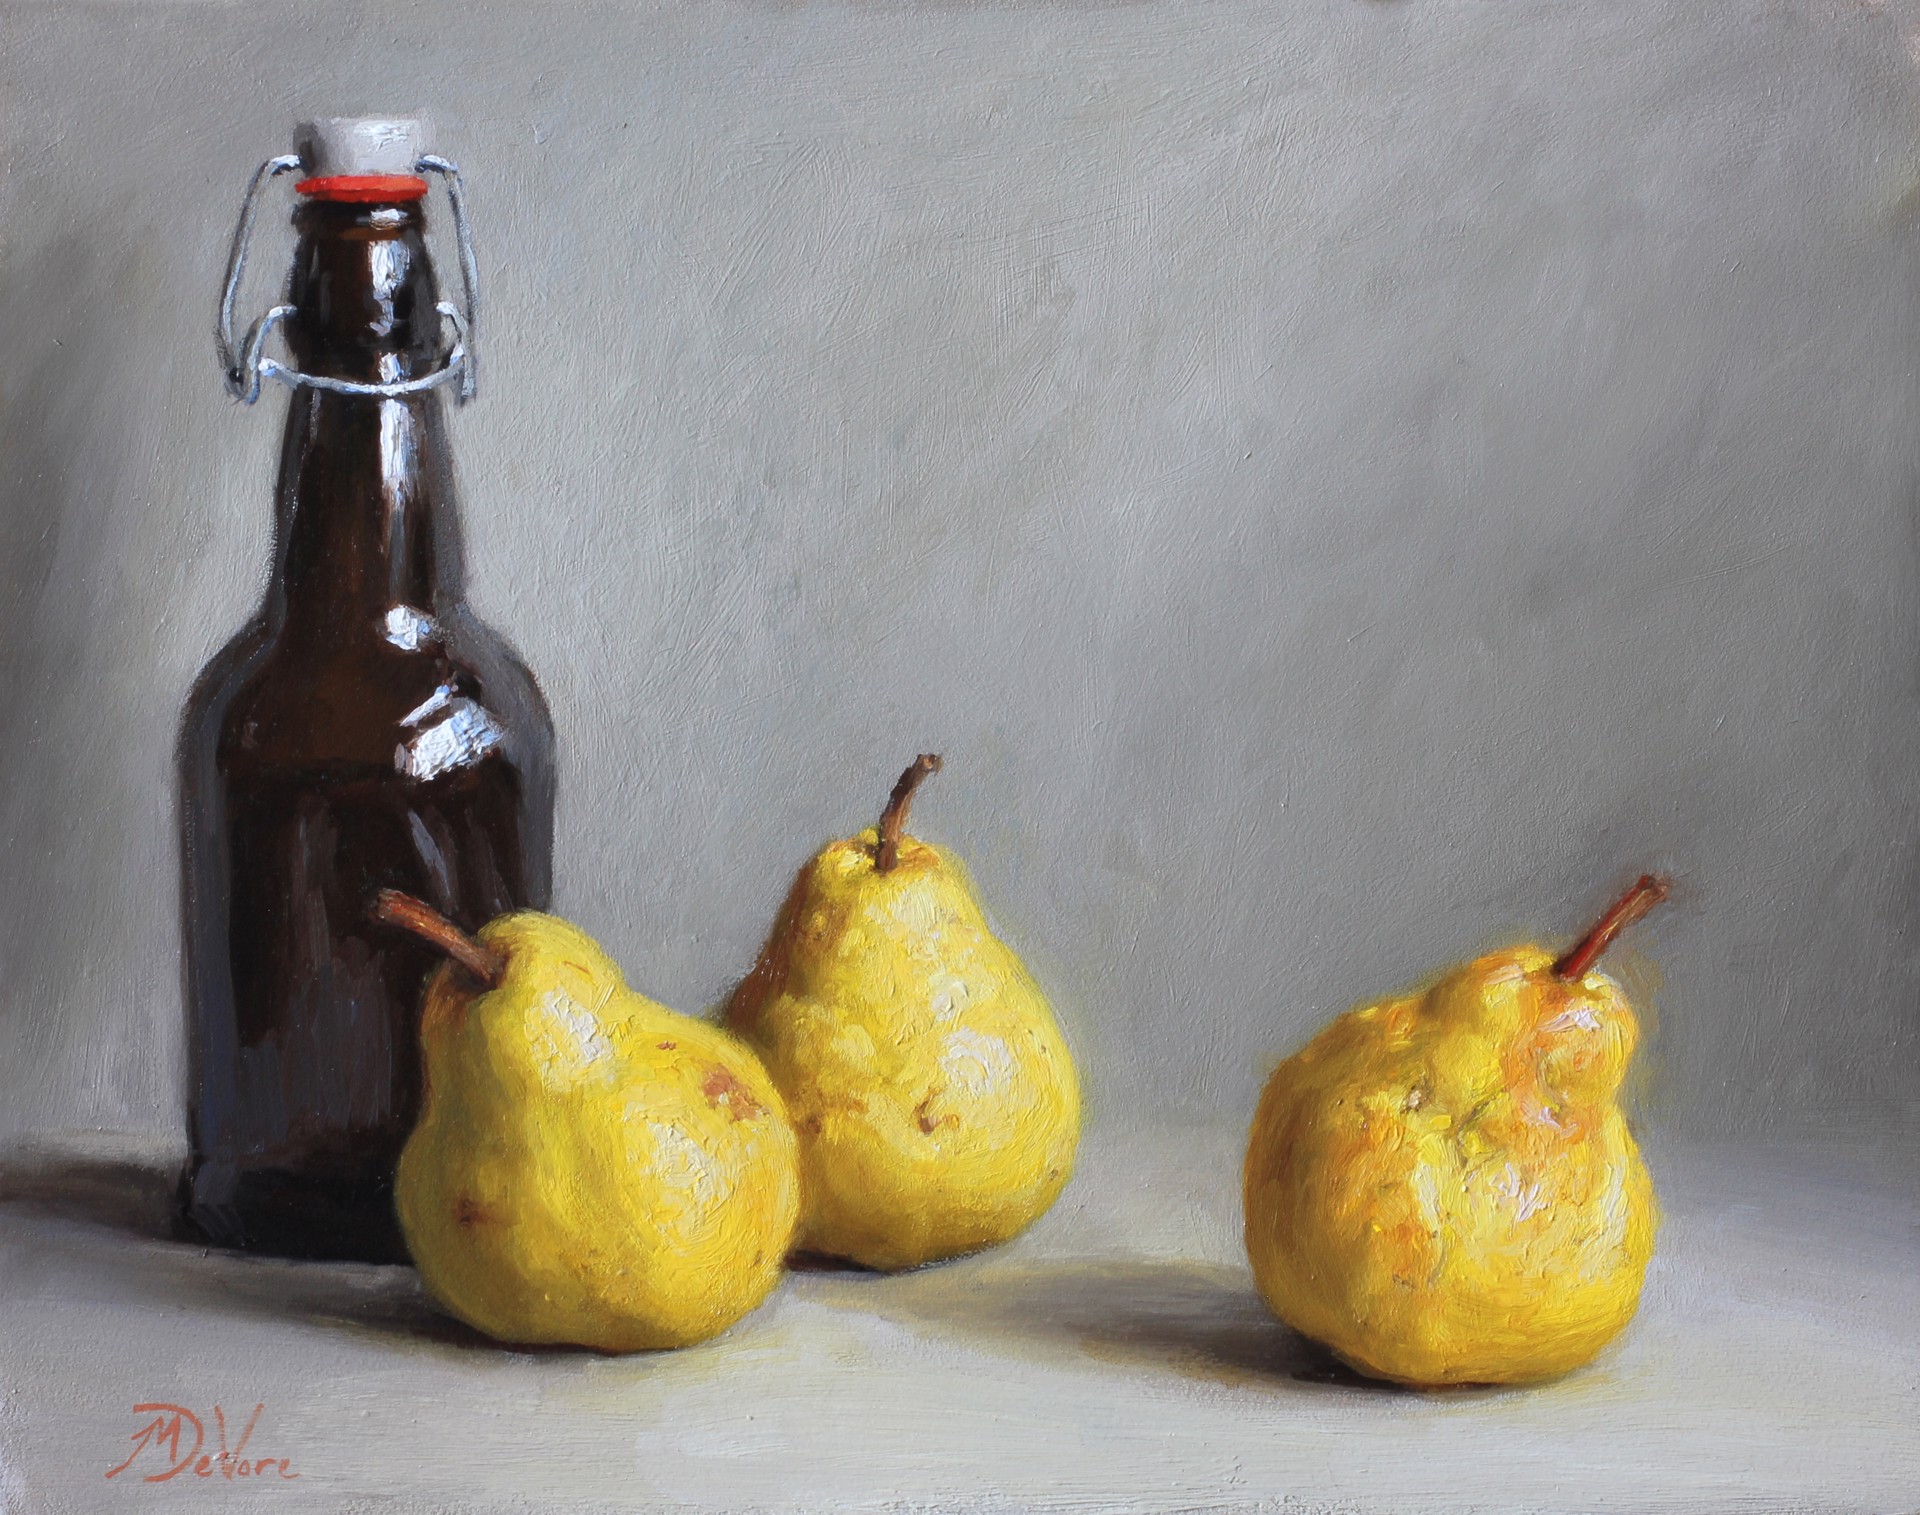 Pear Cider by Michael DeVore